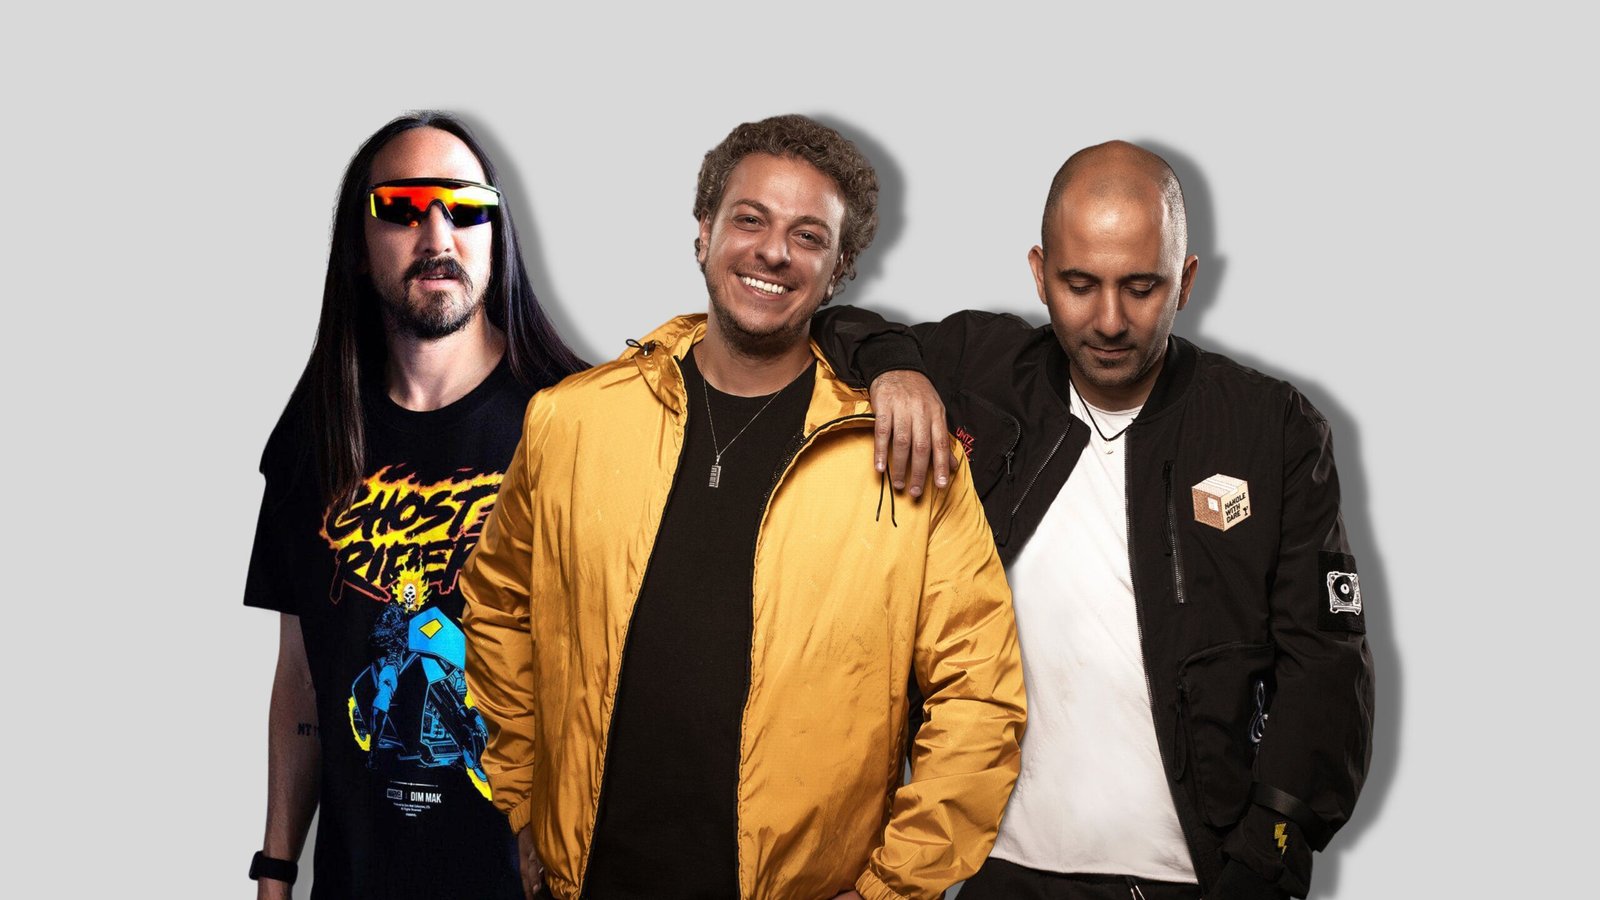 Steve Aoki and Vini Vici Join Forces to Release High-Energy Collaboration 'Wild' Soundrive Music